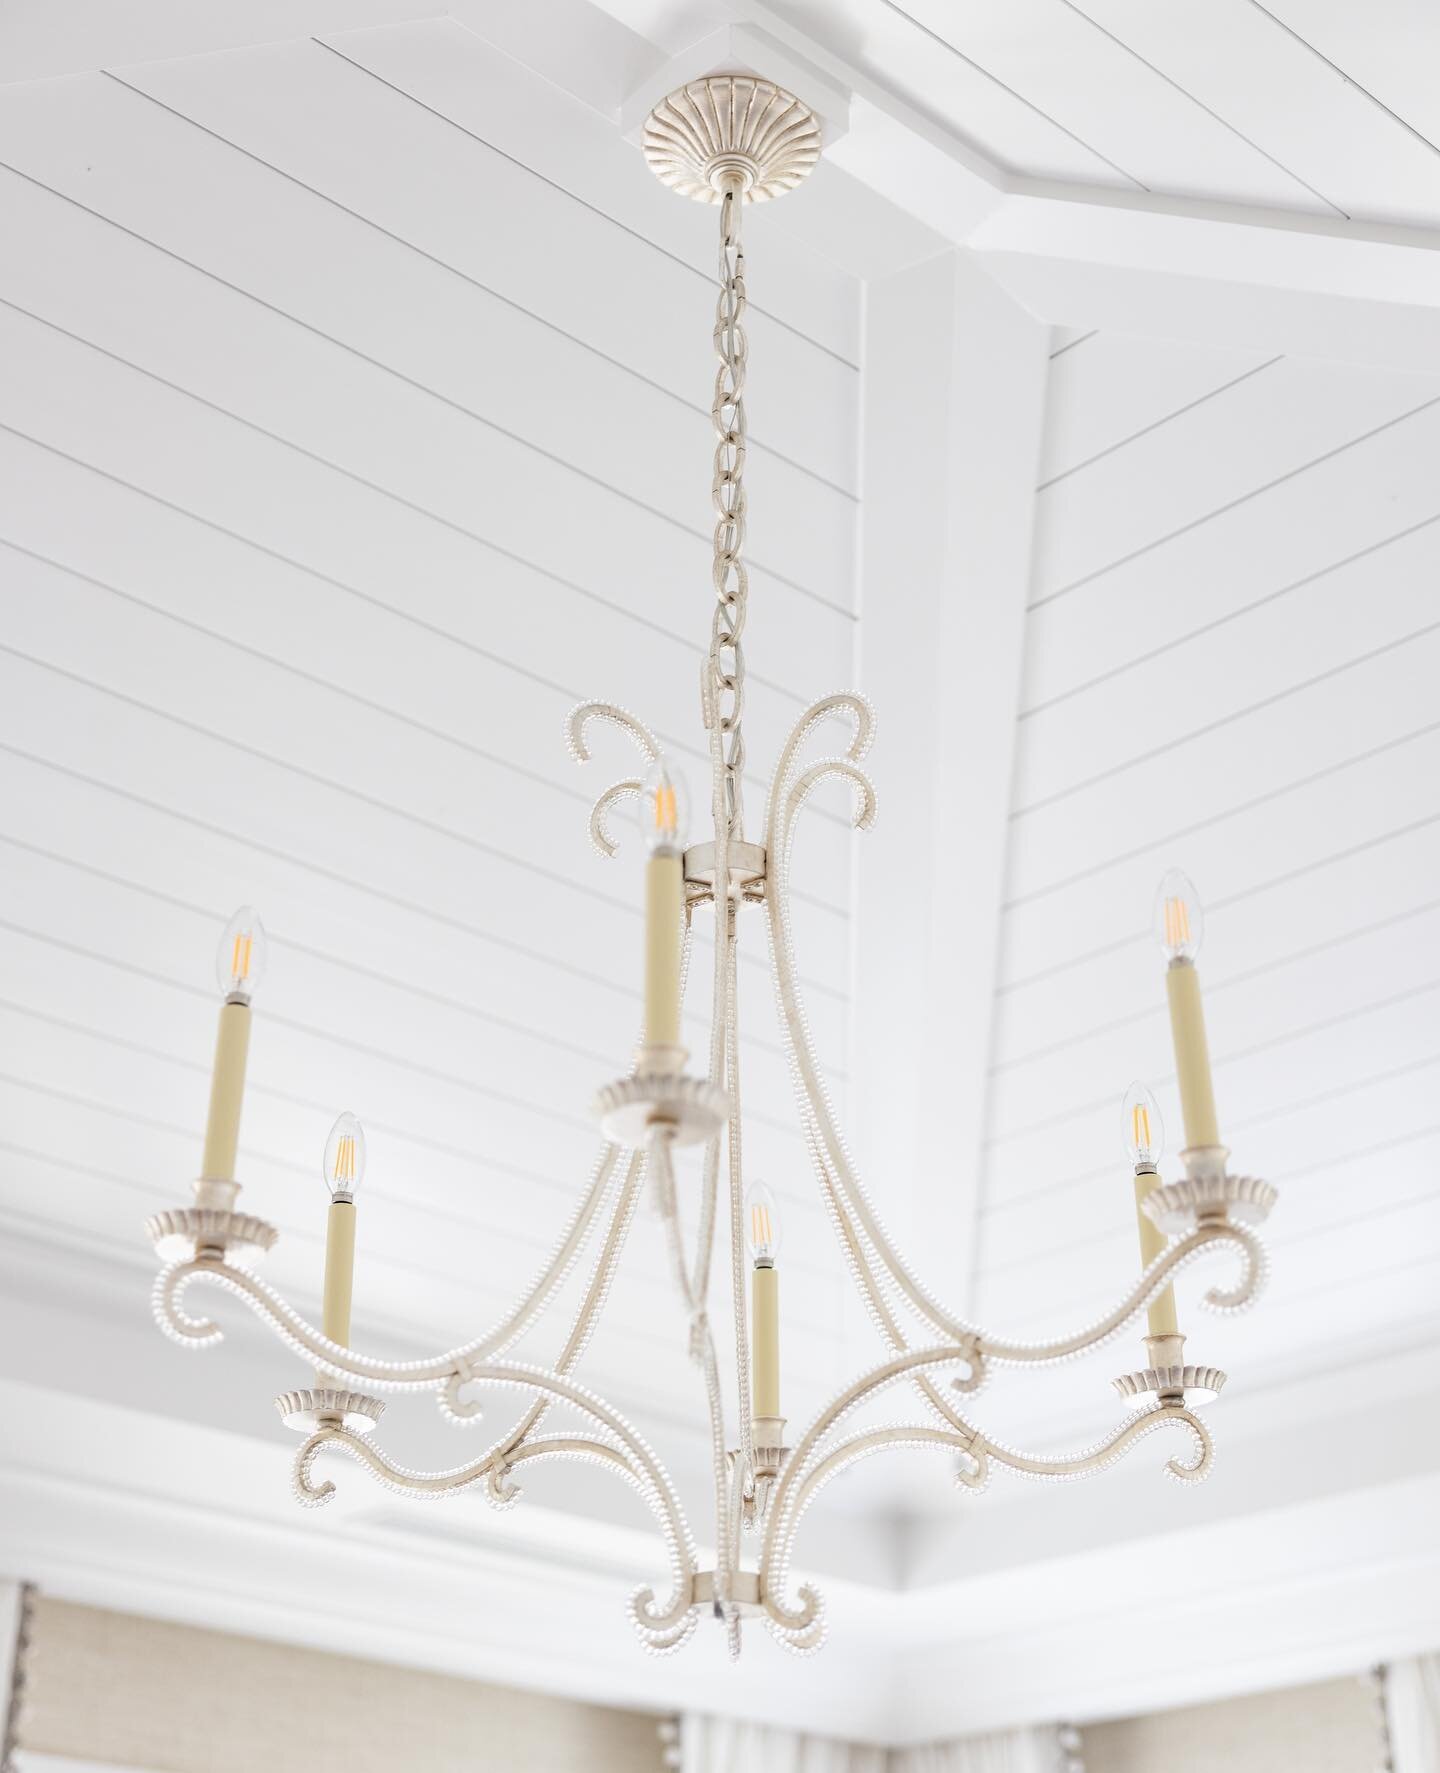 Even in all white, the tiniest details shine through 🤍 Our team wants to do a poll... do you like modern lighting fixtures or classic chandeliers? Let us know in the comments!⁠
⁠
#chandelier #homelighting #candlechandelier #whitepanneling #interiord